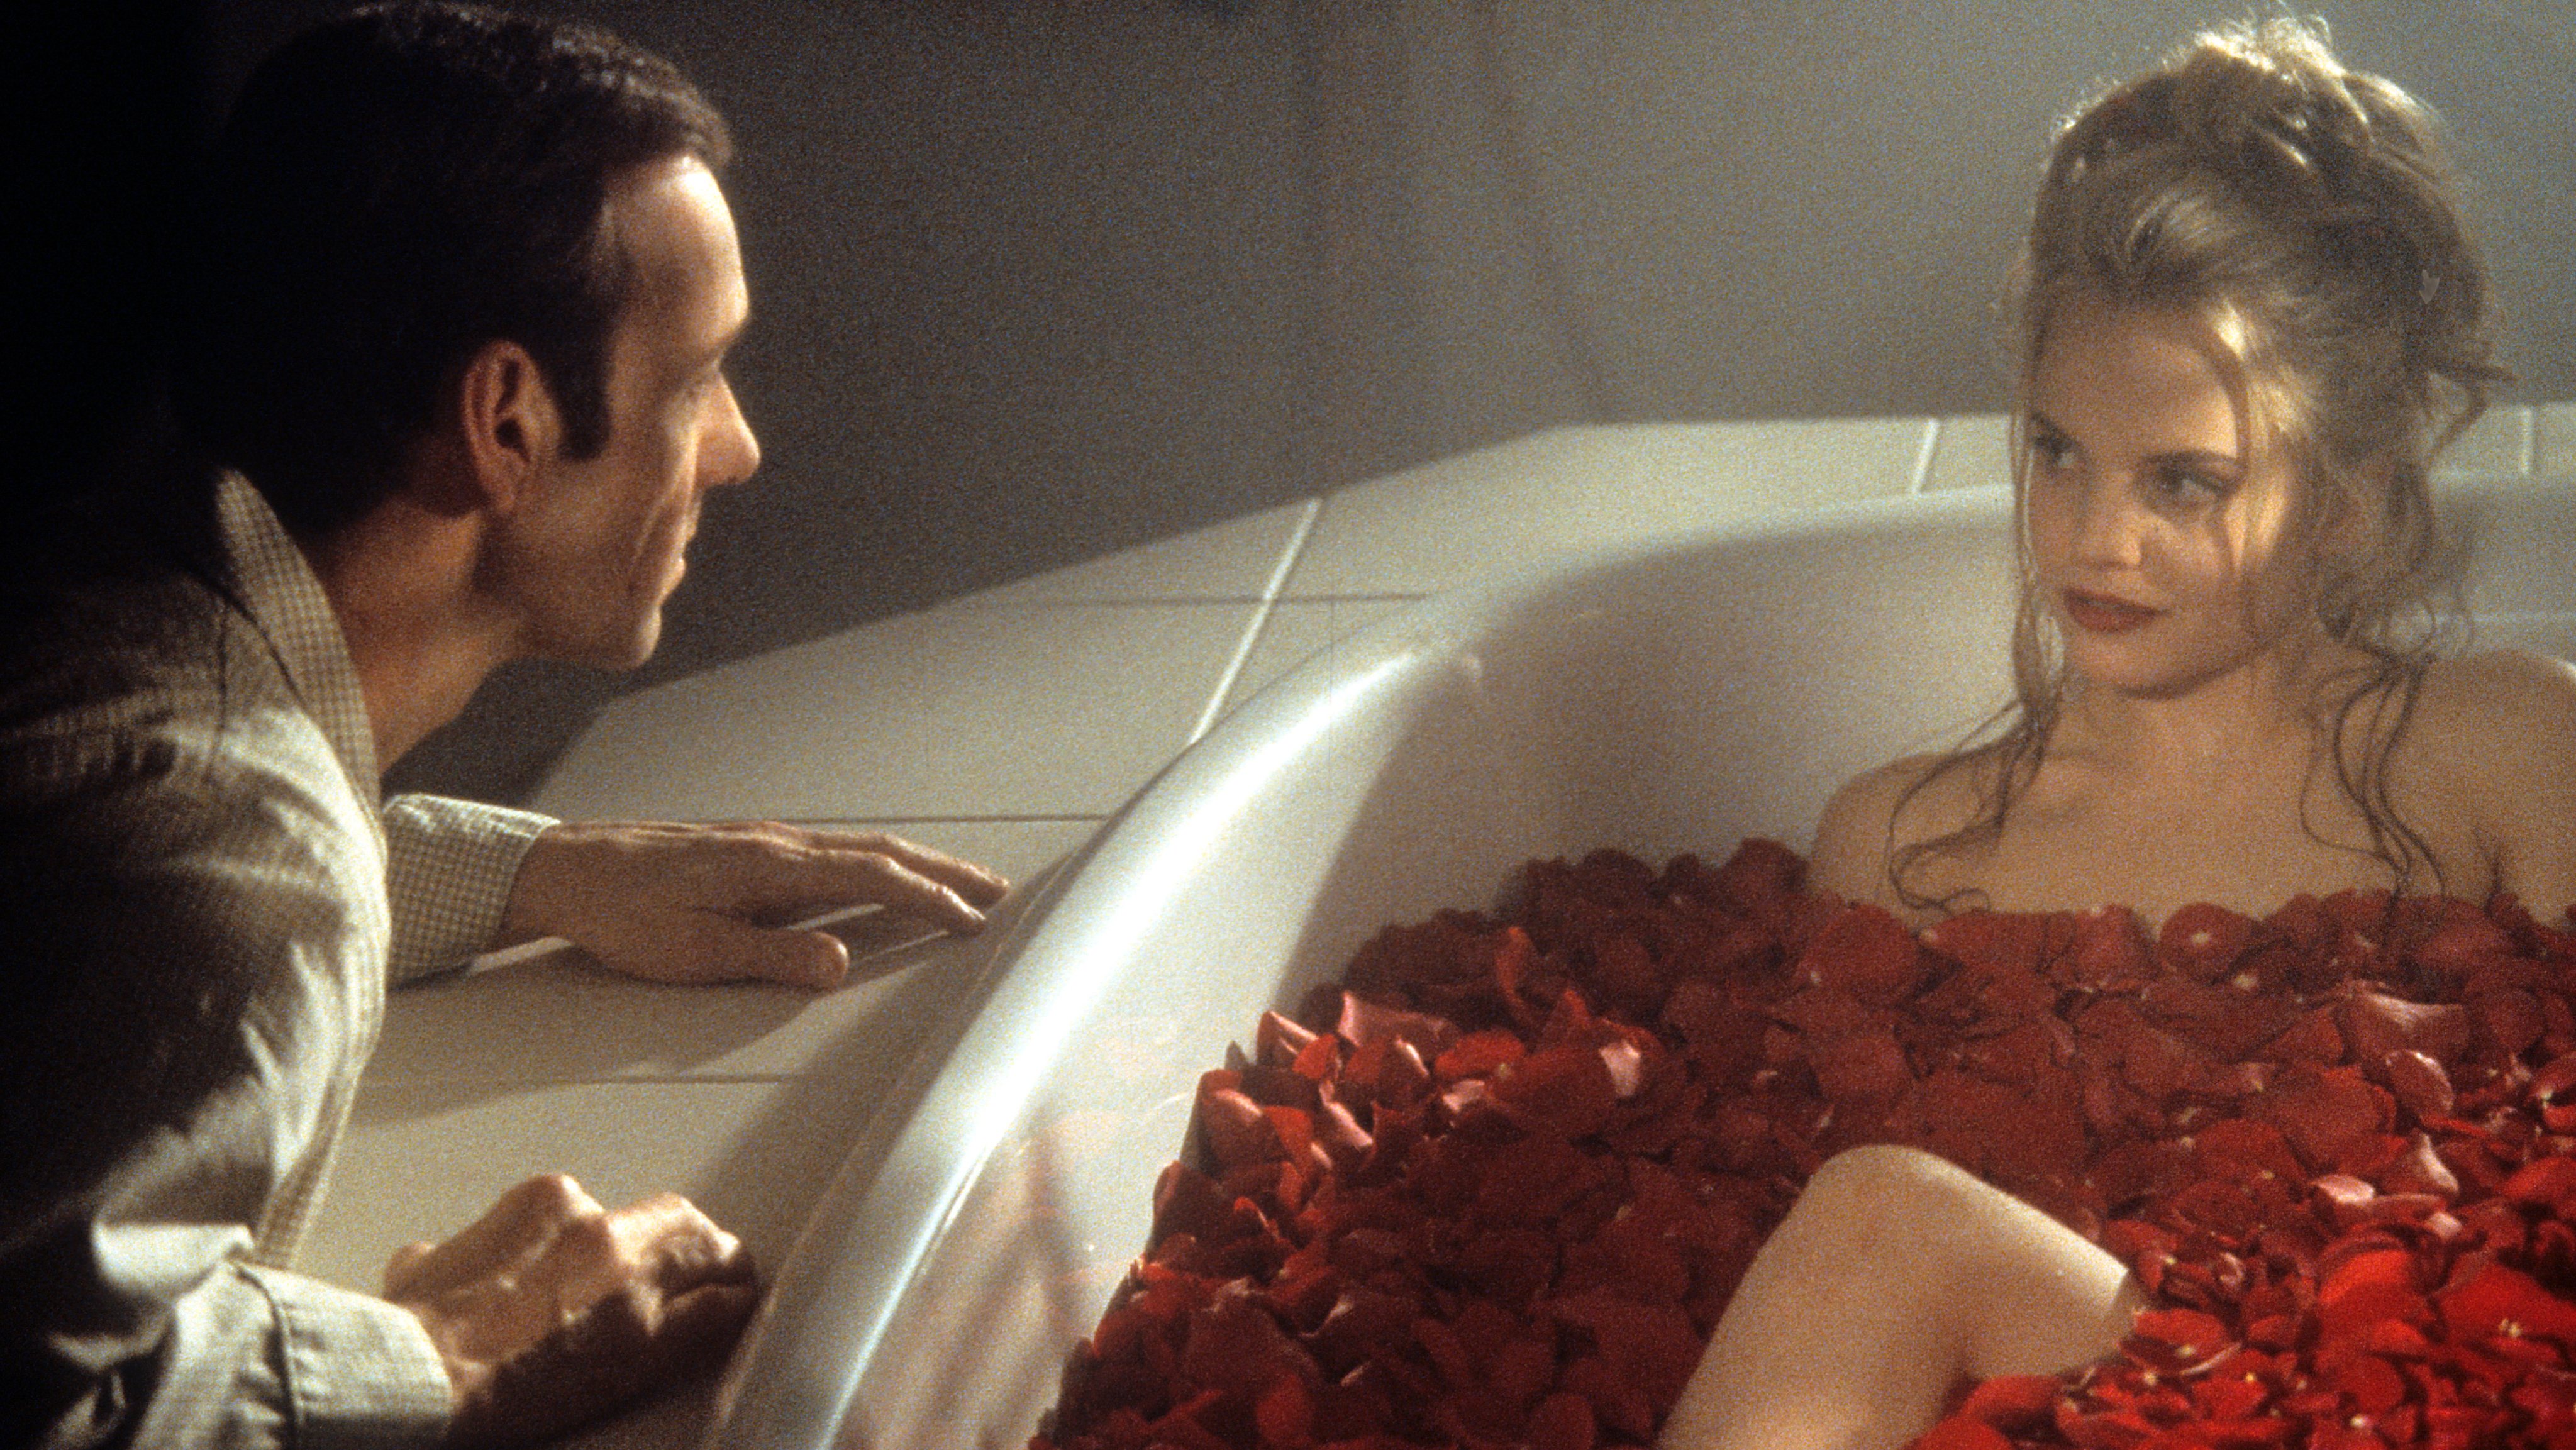 Kevin Spacey And Mena Suvari In &#039;American Beauty&#039;